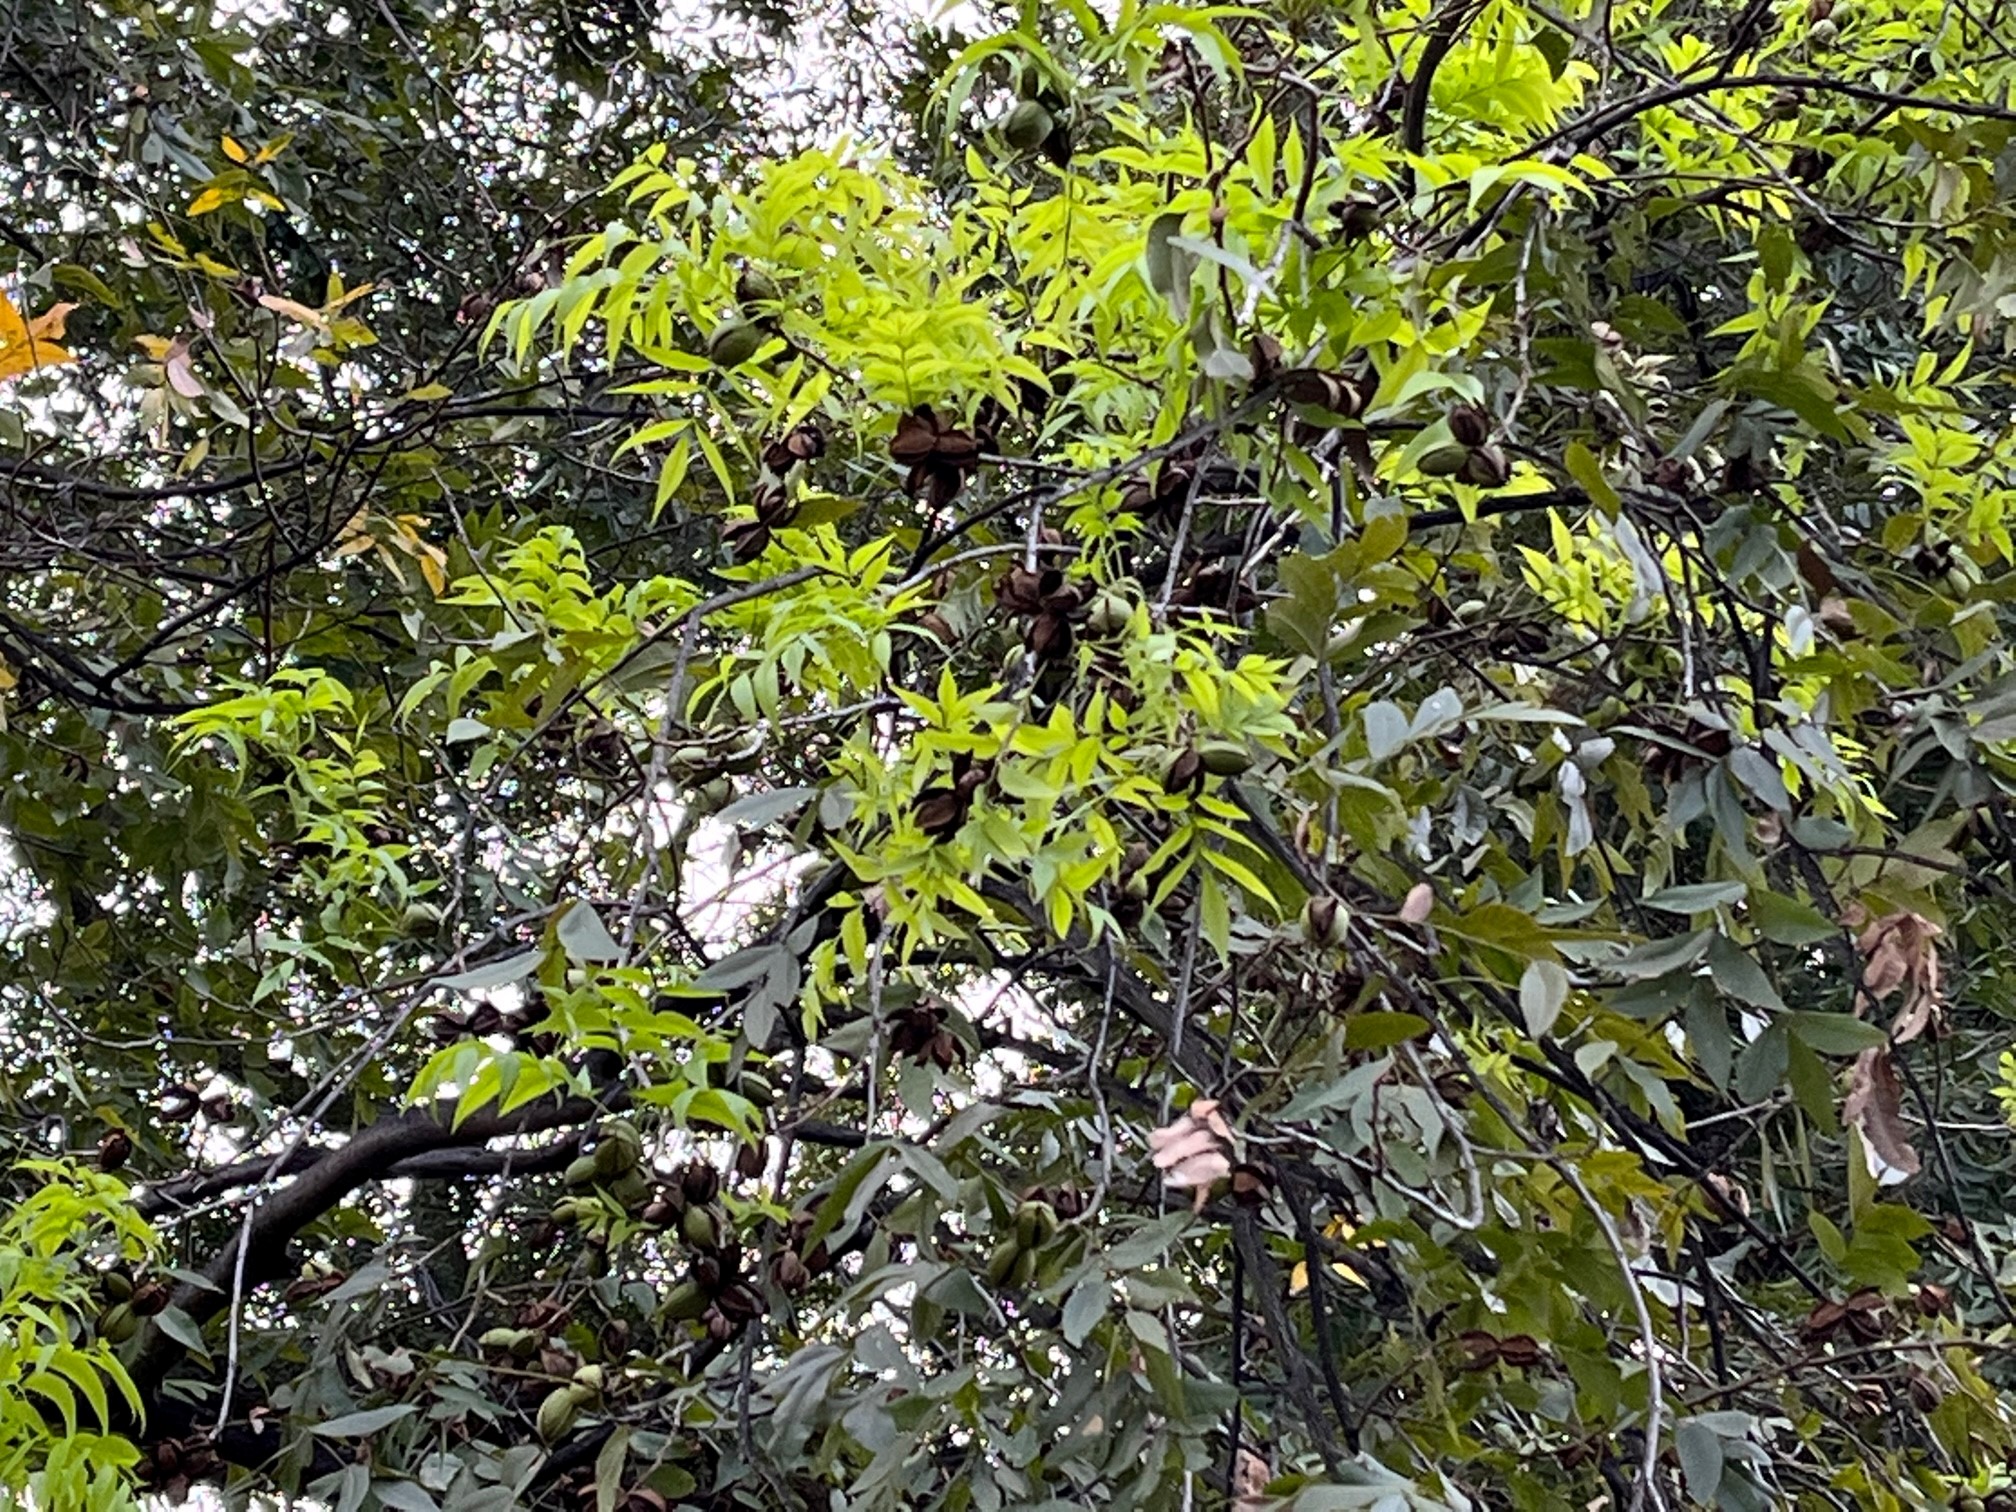 Bunches of bright green leaves grow amongst opening pecan shucks and dark, dying leaves.